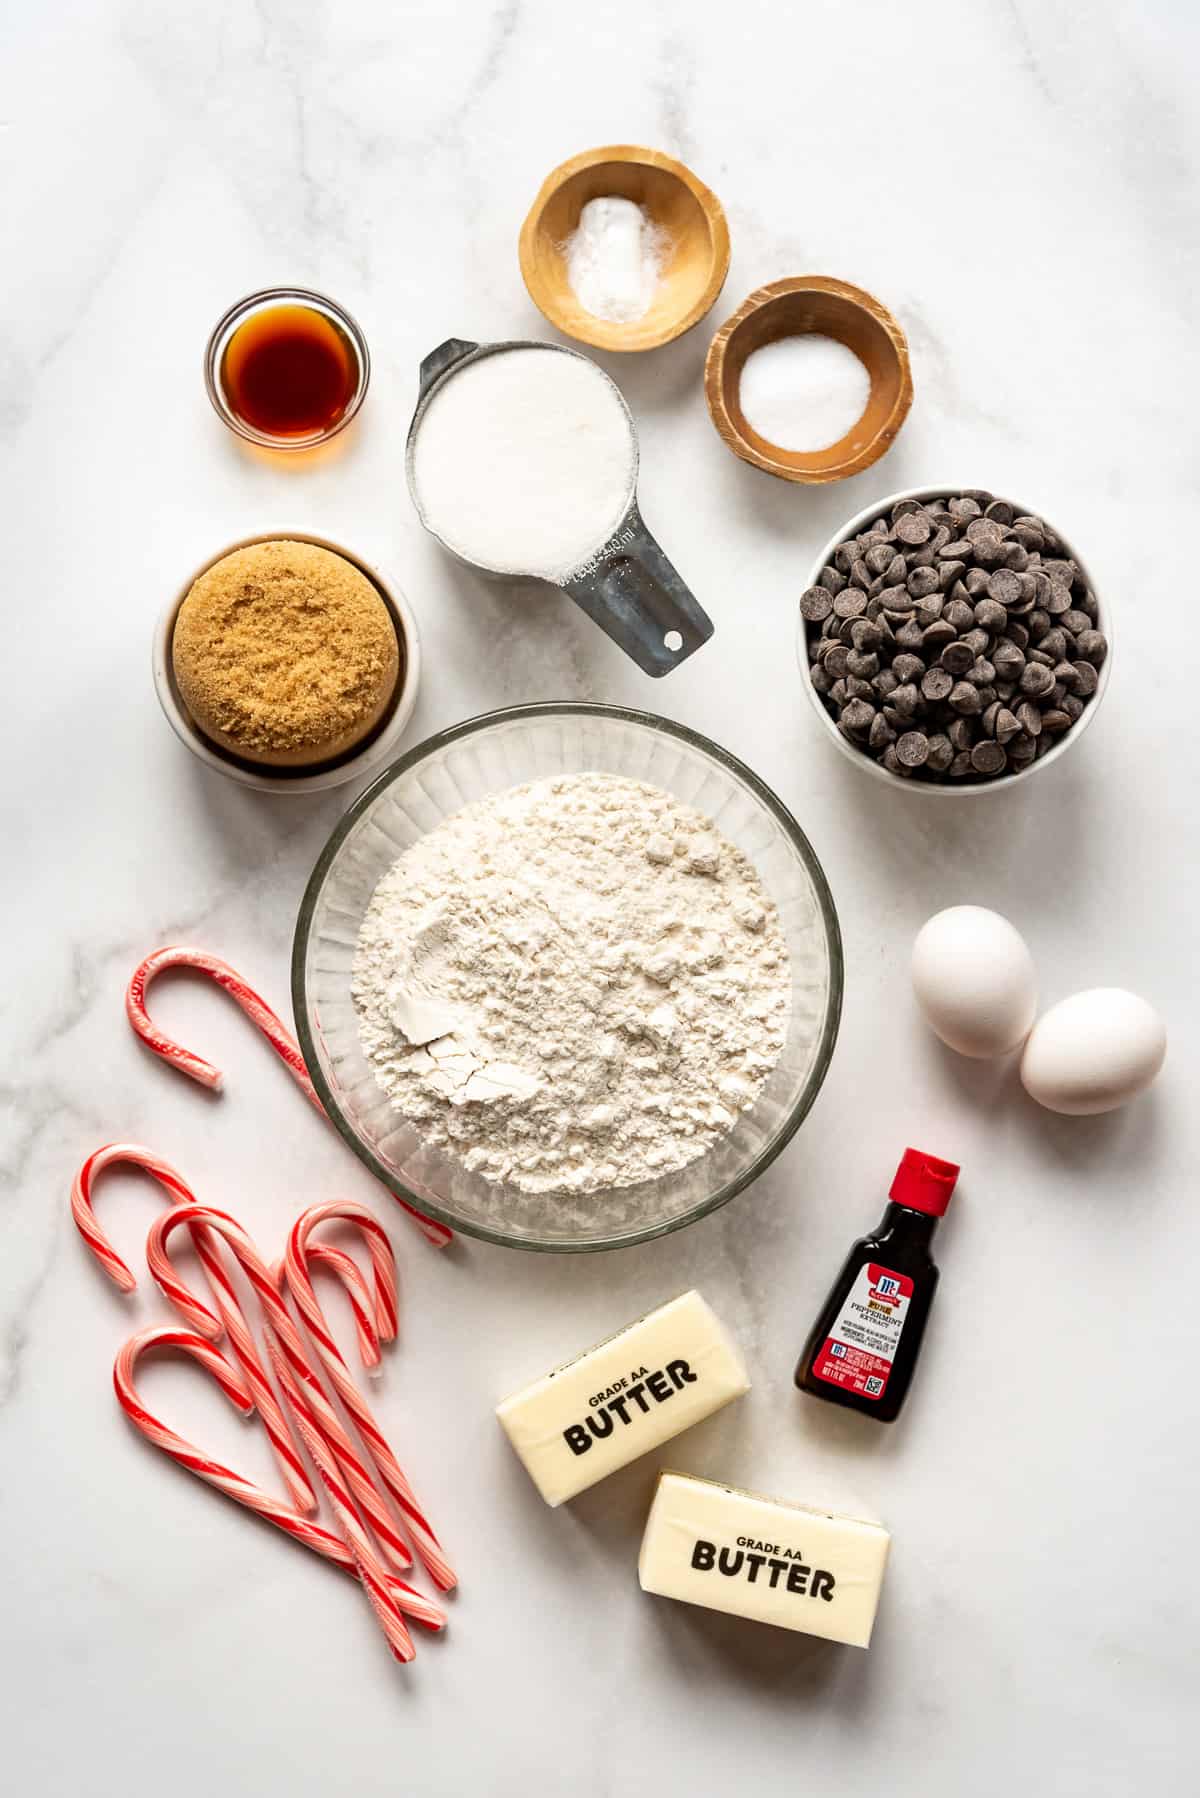 Ingredients for making peppermint chocolate chip cookies.